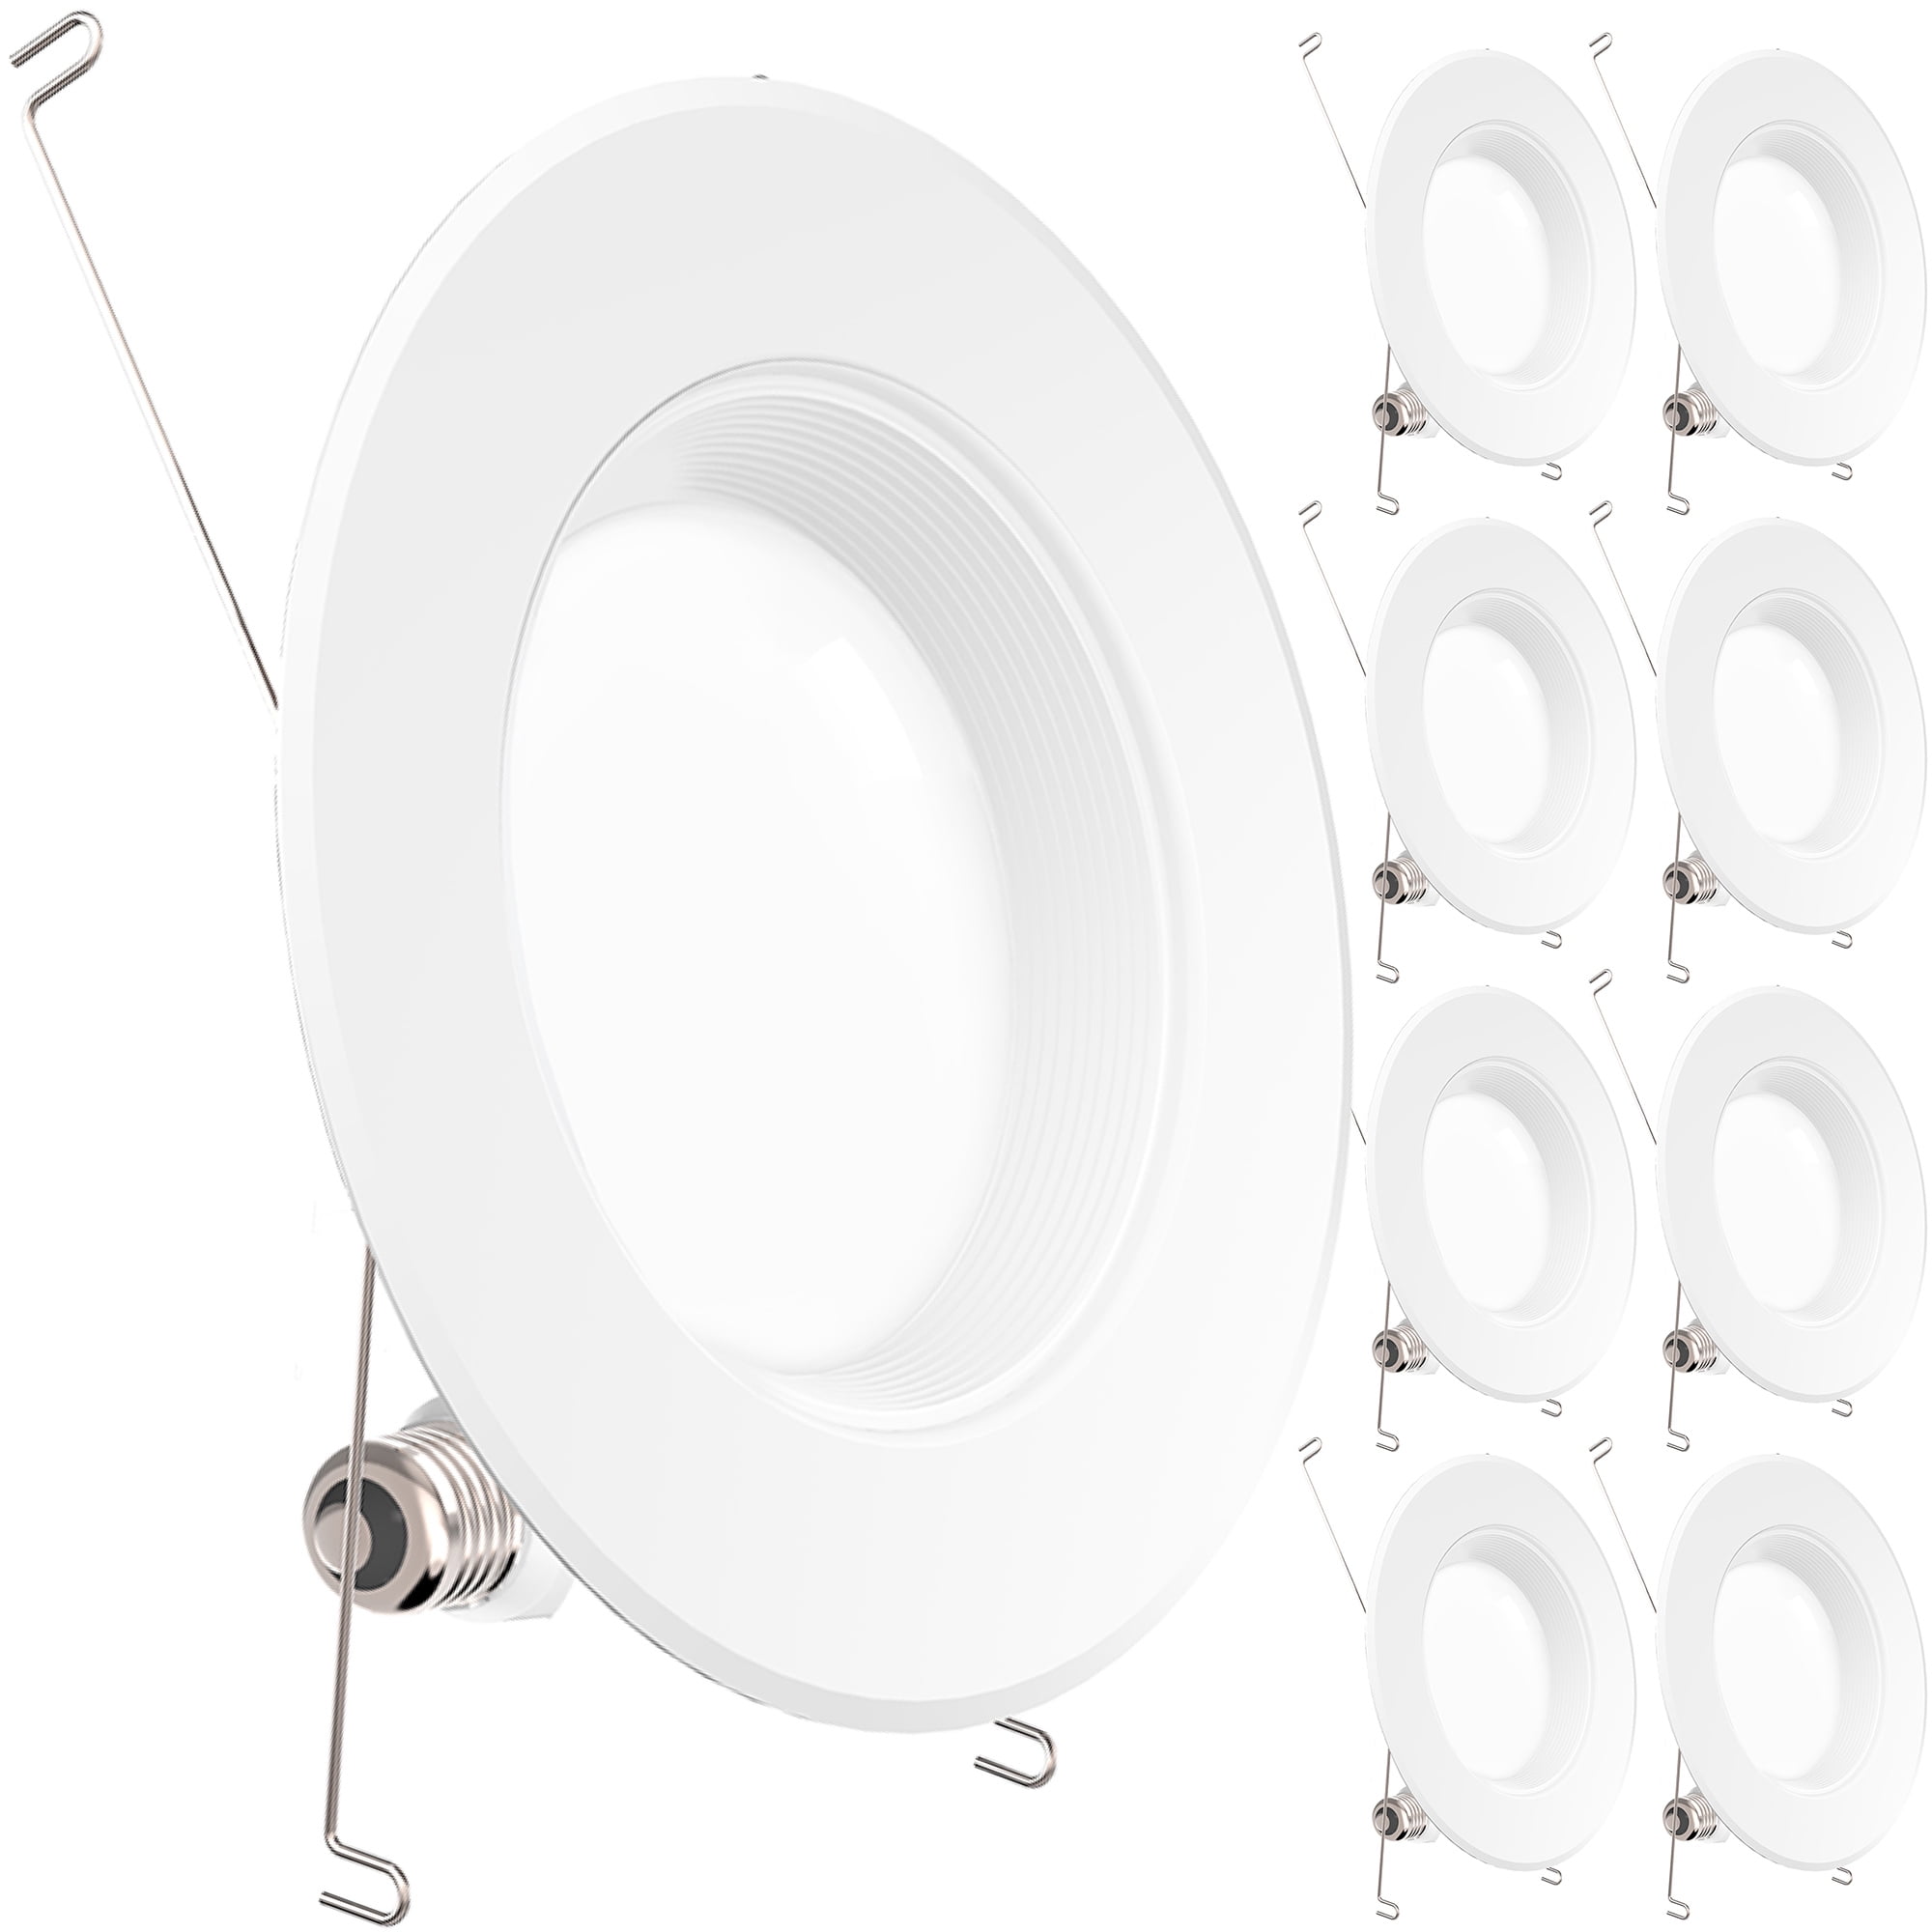 Baffle Trim Dimmable, Sunco Lighting 12 Pack 5/6 Inch LED Recessed Downlight 